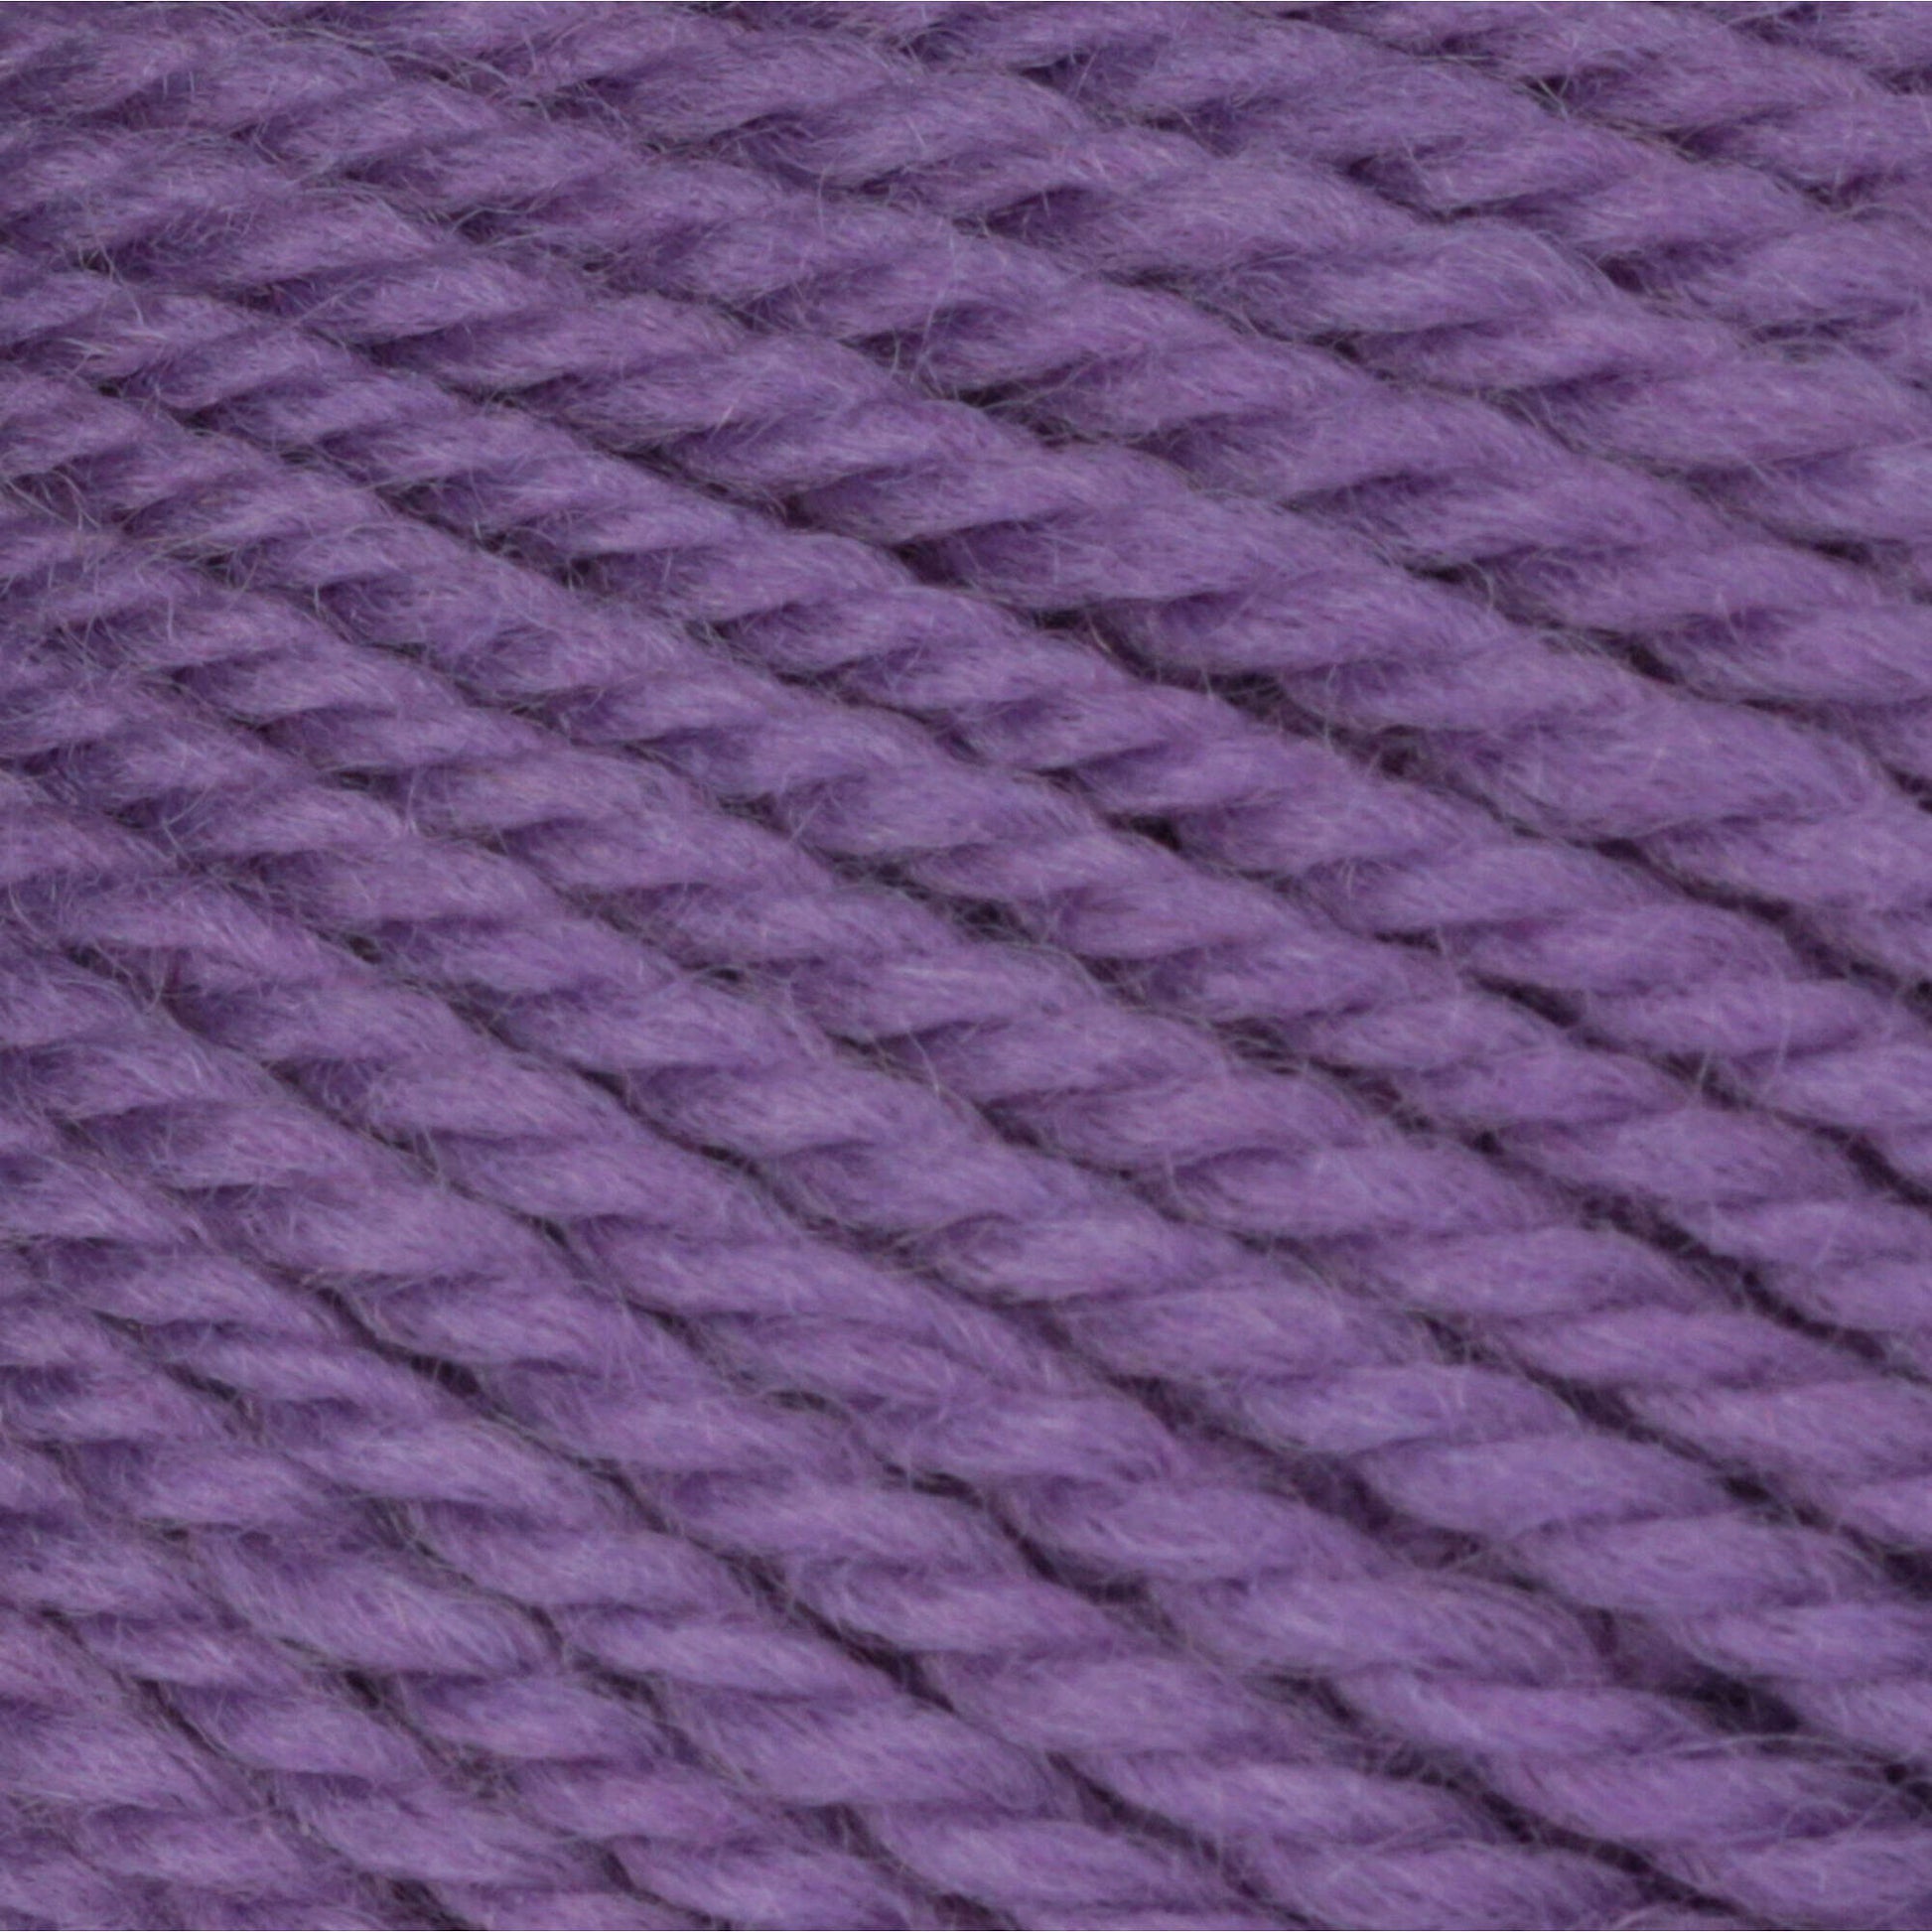 Patons Classic Wool Worsted Yarn - Discontinued Shades Wisteria